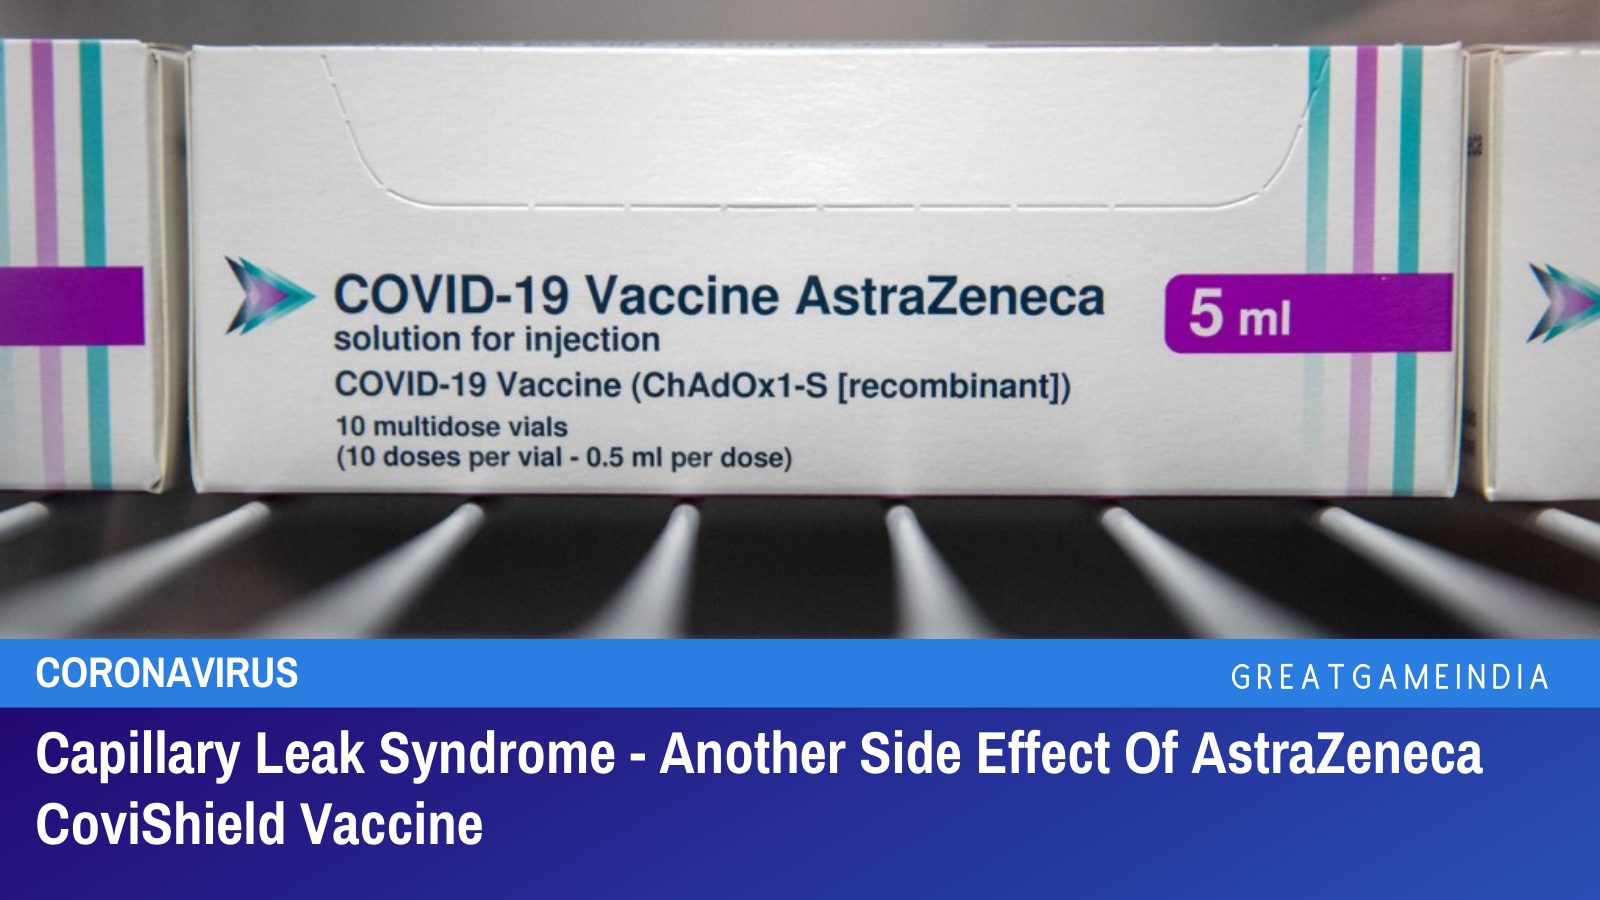 Capillary Leak Syndrome - Another Side Effect Of AstraZeneca CoviShield Vaccine